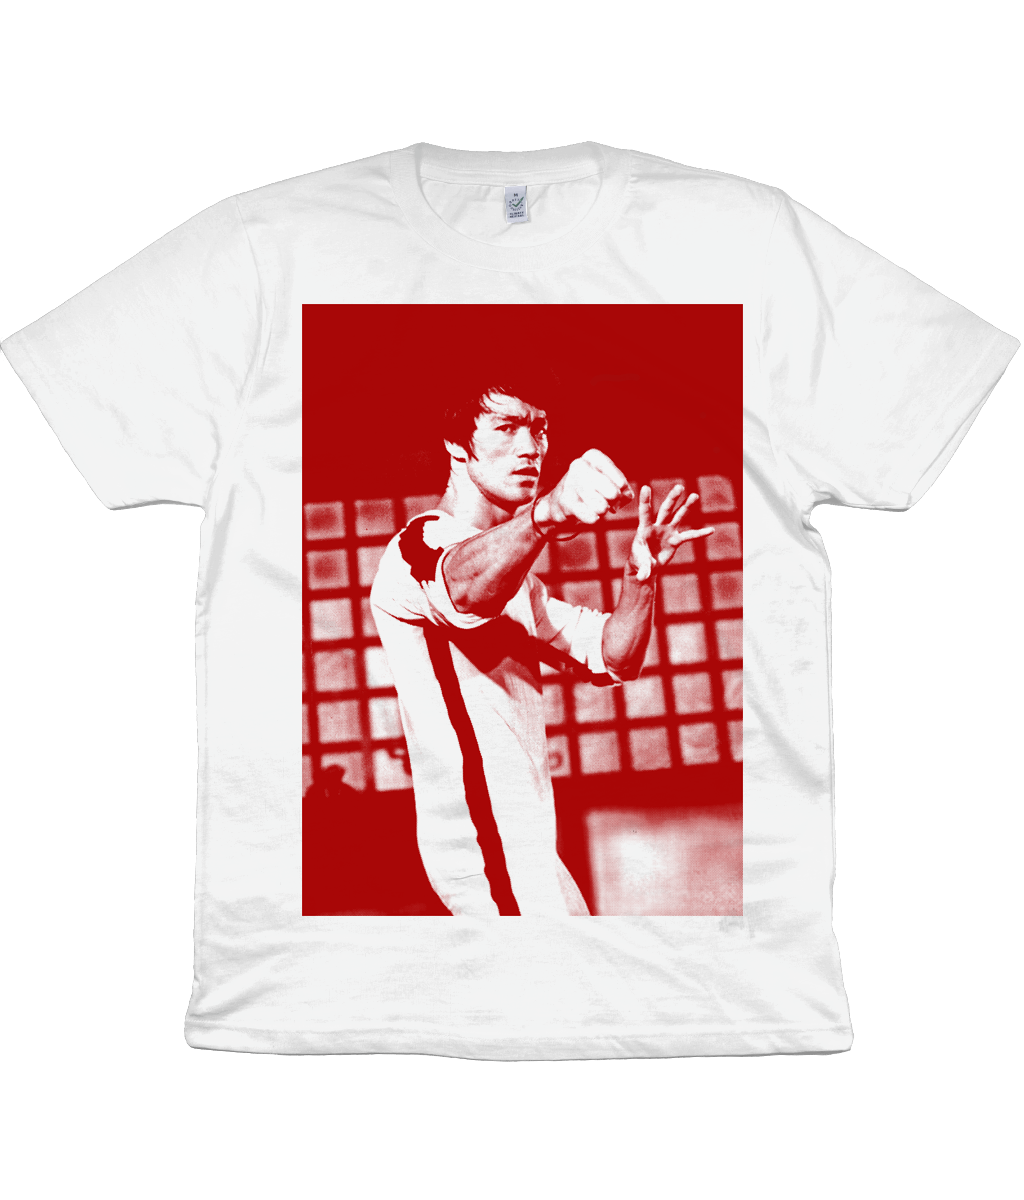 BRUCE LEE - RED